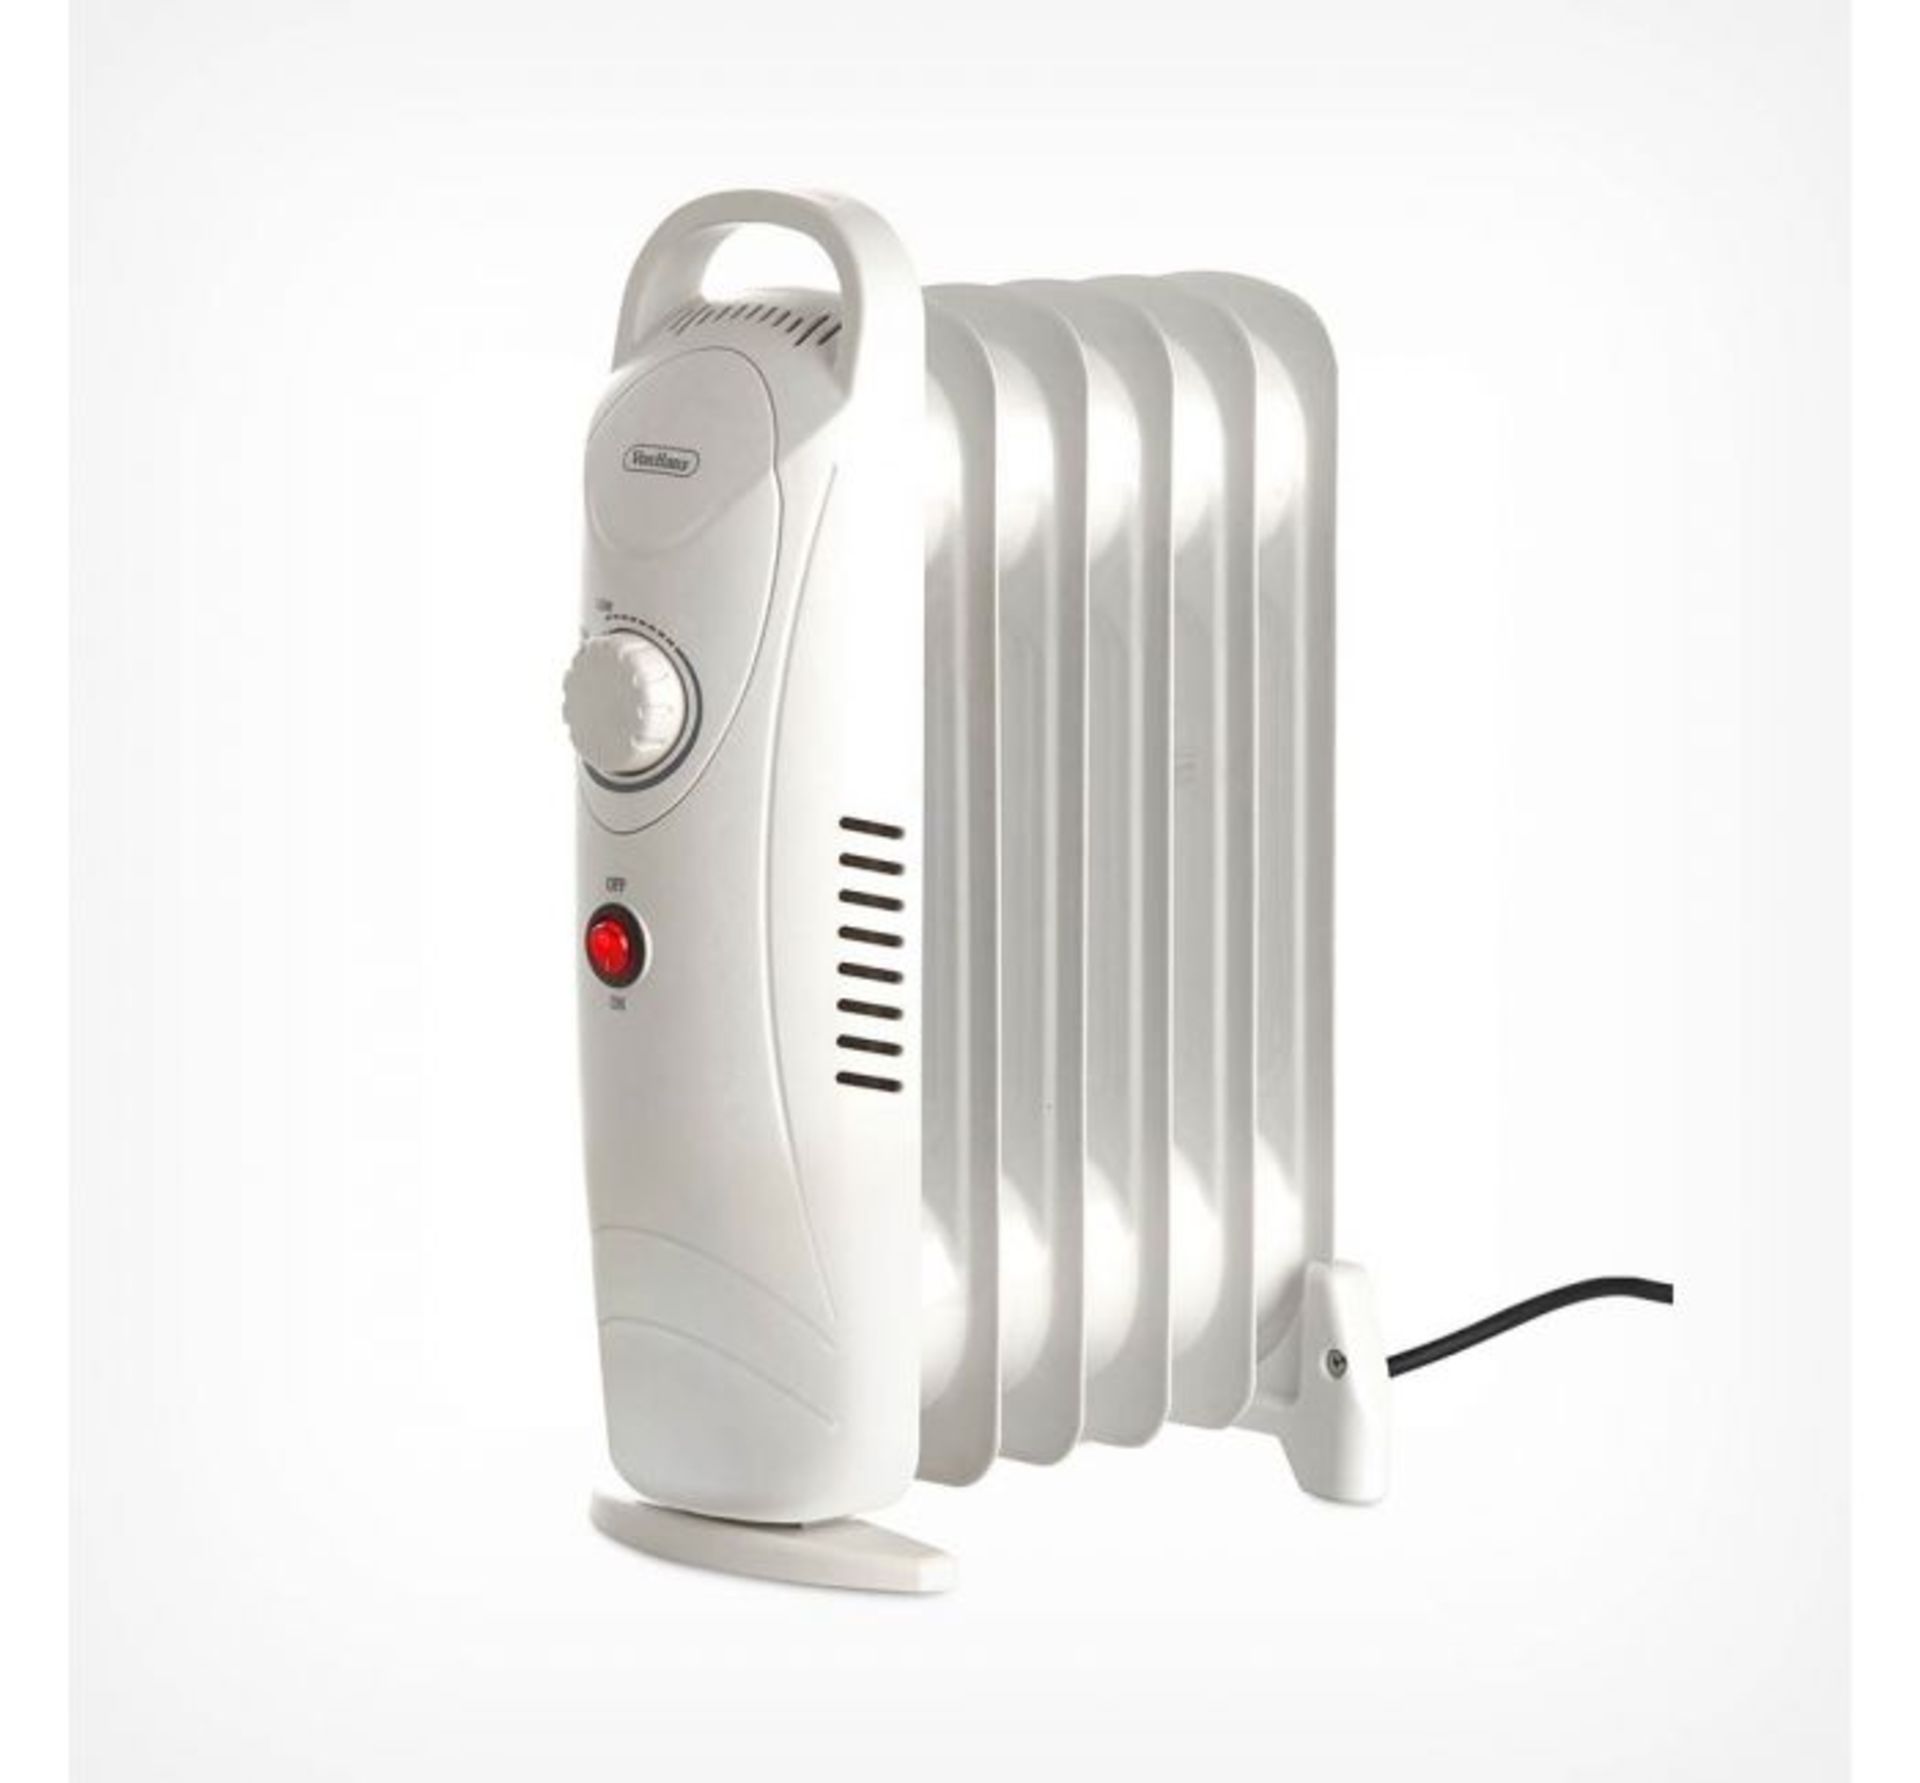 (X34) 1x 6 Fin 800W Oil Filled Radiator - White. Compact yet powerful 800W radiator with 6 oil-fil - Image 3 of 4